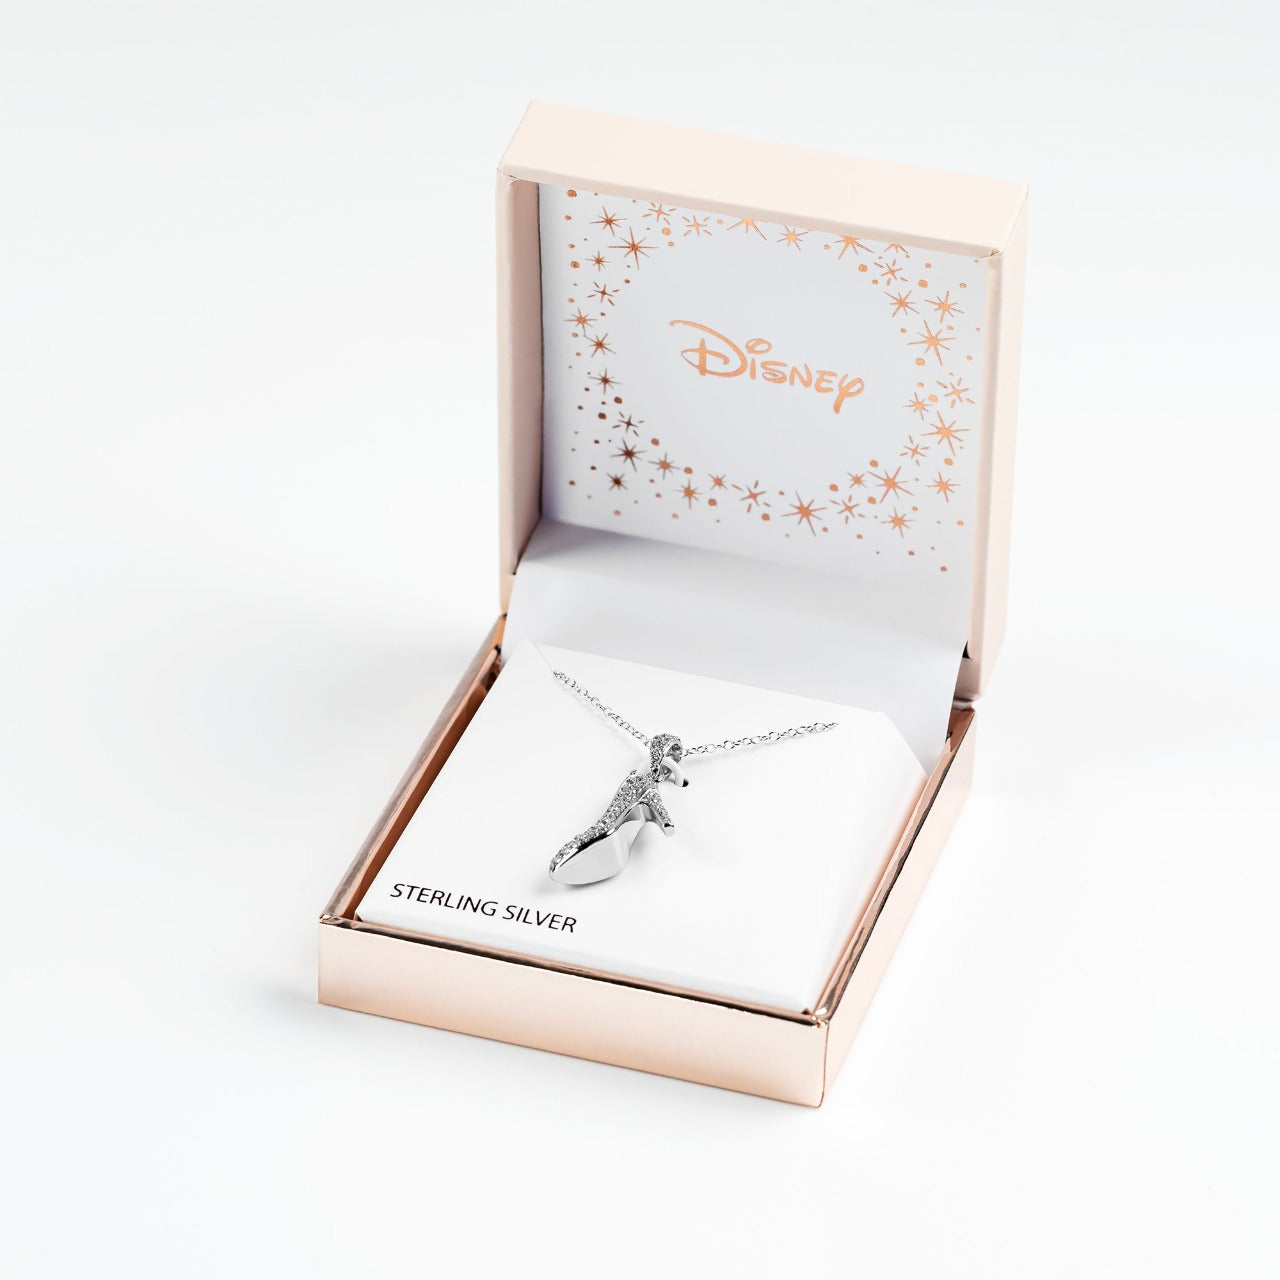 Disney Silver Cinderella Glass Slipper CZ Stones Rose Gold Heart Necklace  Disney Cinderella Princess Collection, sterling silver iconic glass slipper pendant set with clear stones and a Rose gold plated heart pendant necklace adding a feminine touch to the Disney classic piece of Jewellery.